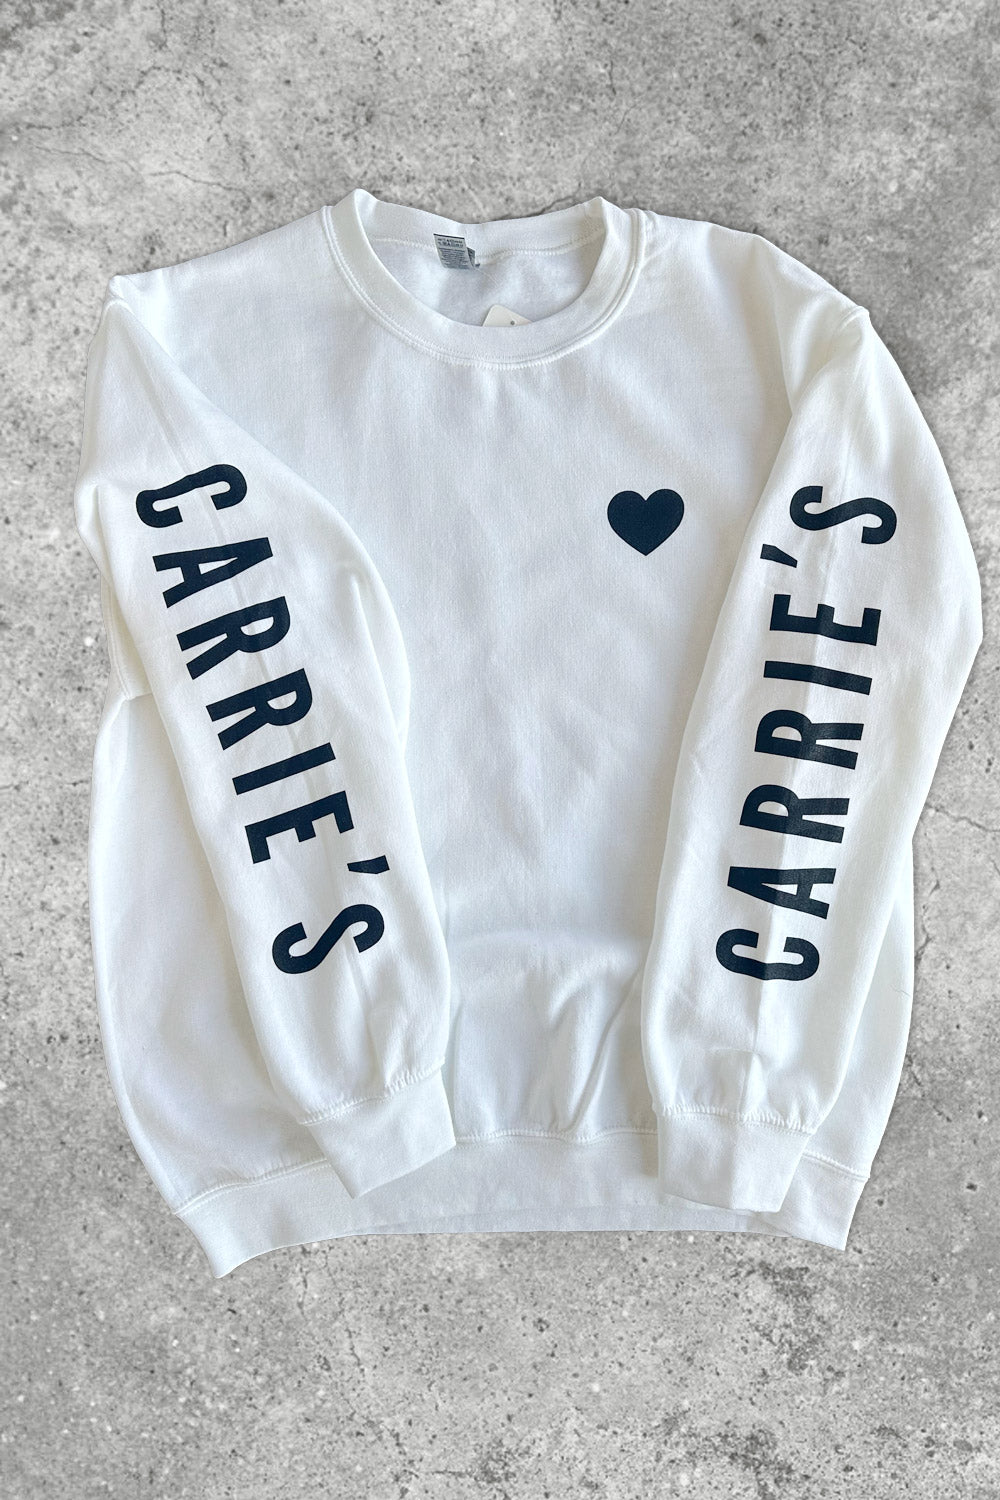 Carrie’s Heart Crewneck - White with Black Text